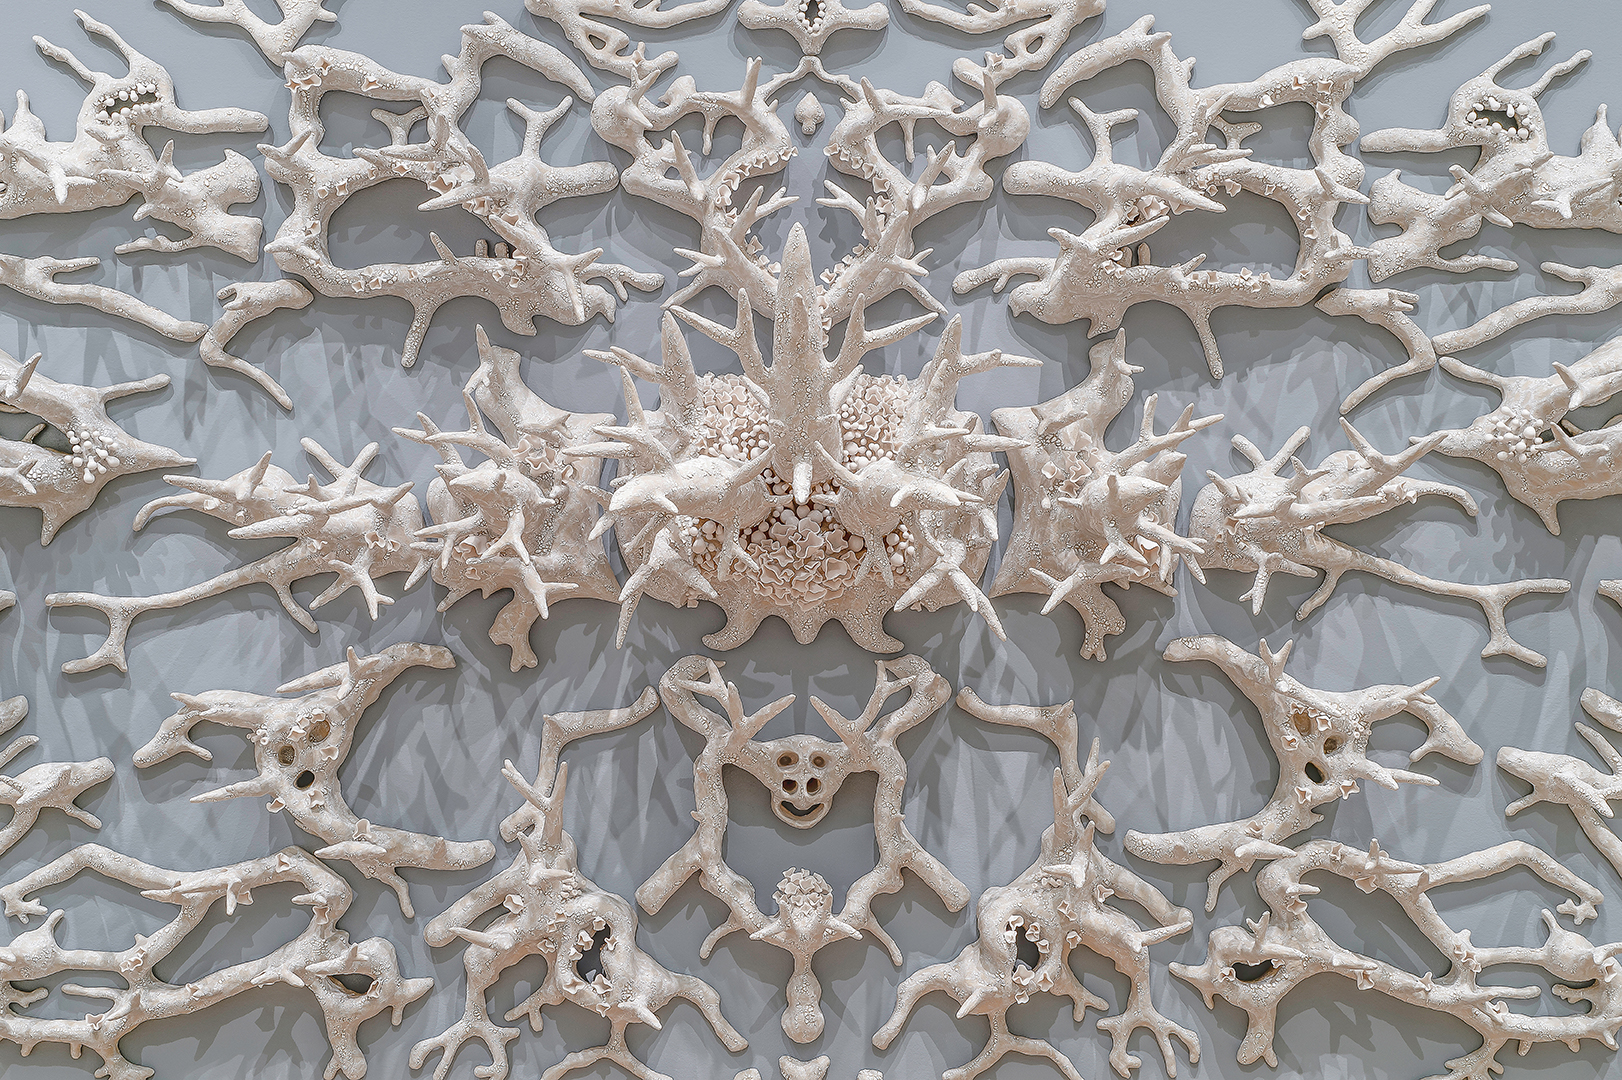 Courtney Mattison, <i>Malum Geminos</i> (“Evil Twins” in Latin)(detail)(2019). Glazed stoneware and porcelain. Dimensions: 7’ x 21’ x 2’. Photograph by Paul Mutino for the Florence Griswold Museum. ©2019 Courtney Mattison. Courtesy of the artist. On exhibit at the Florence Griswold Museum.